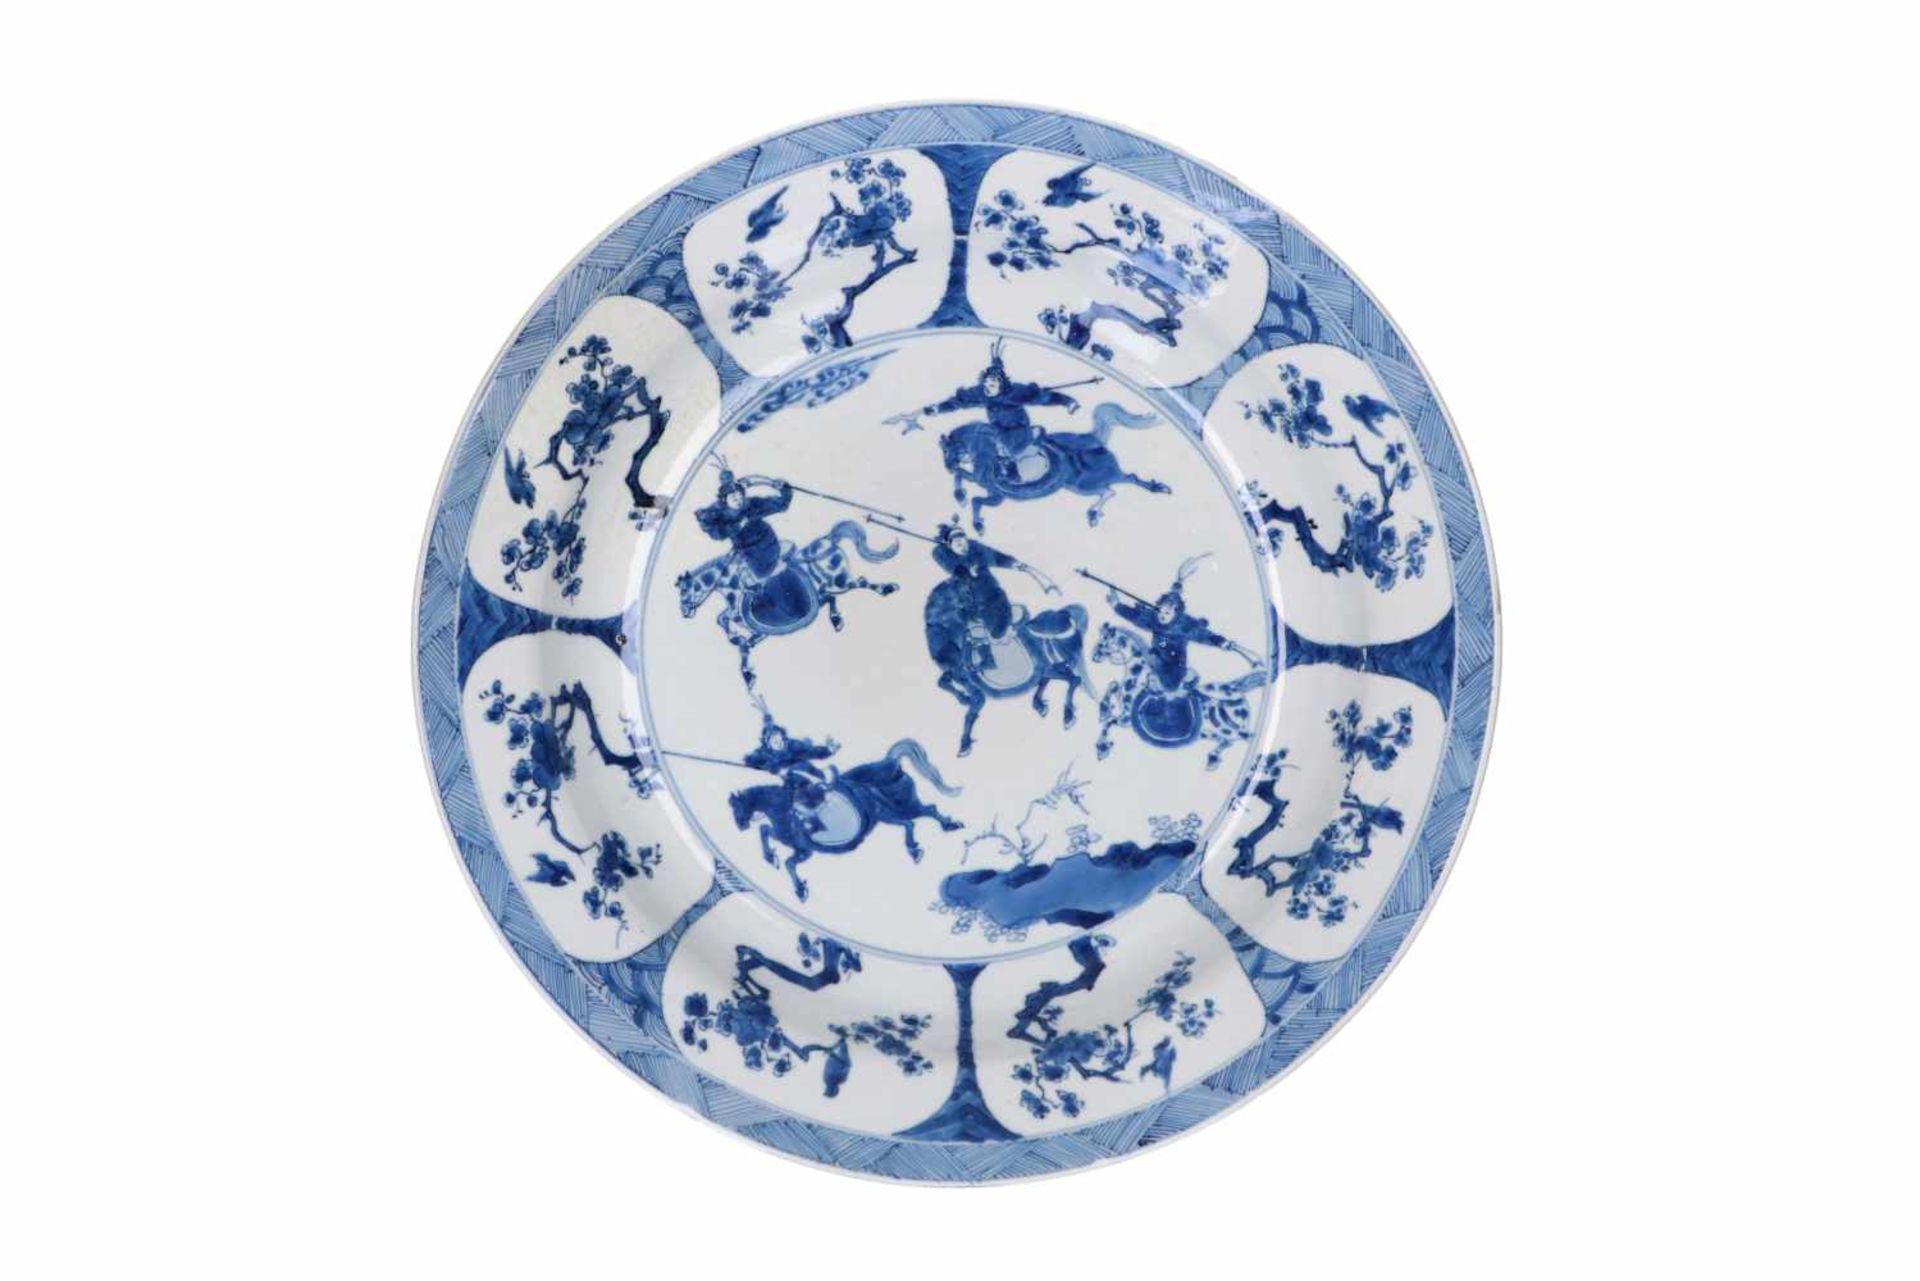 A blue and white porcelain deep charger, decorated with horsemen, flowers and birds. Marked with 6-